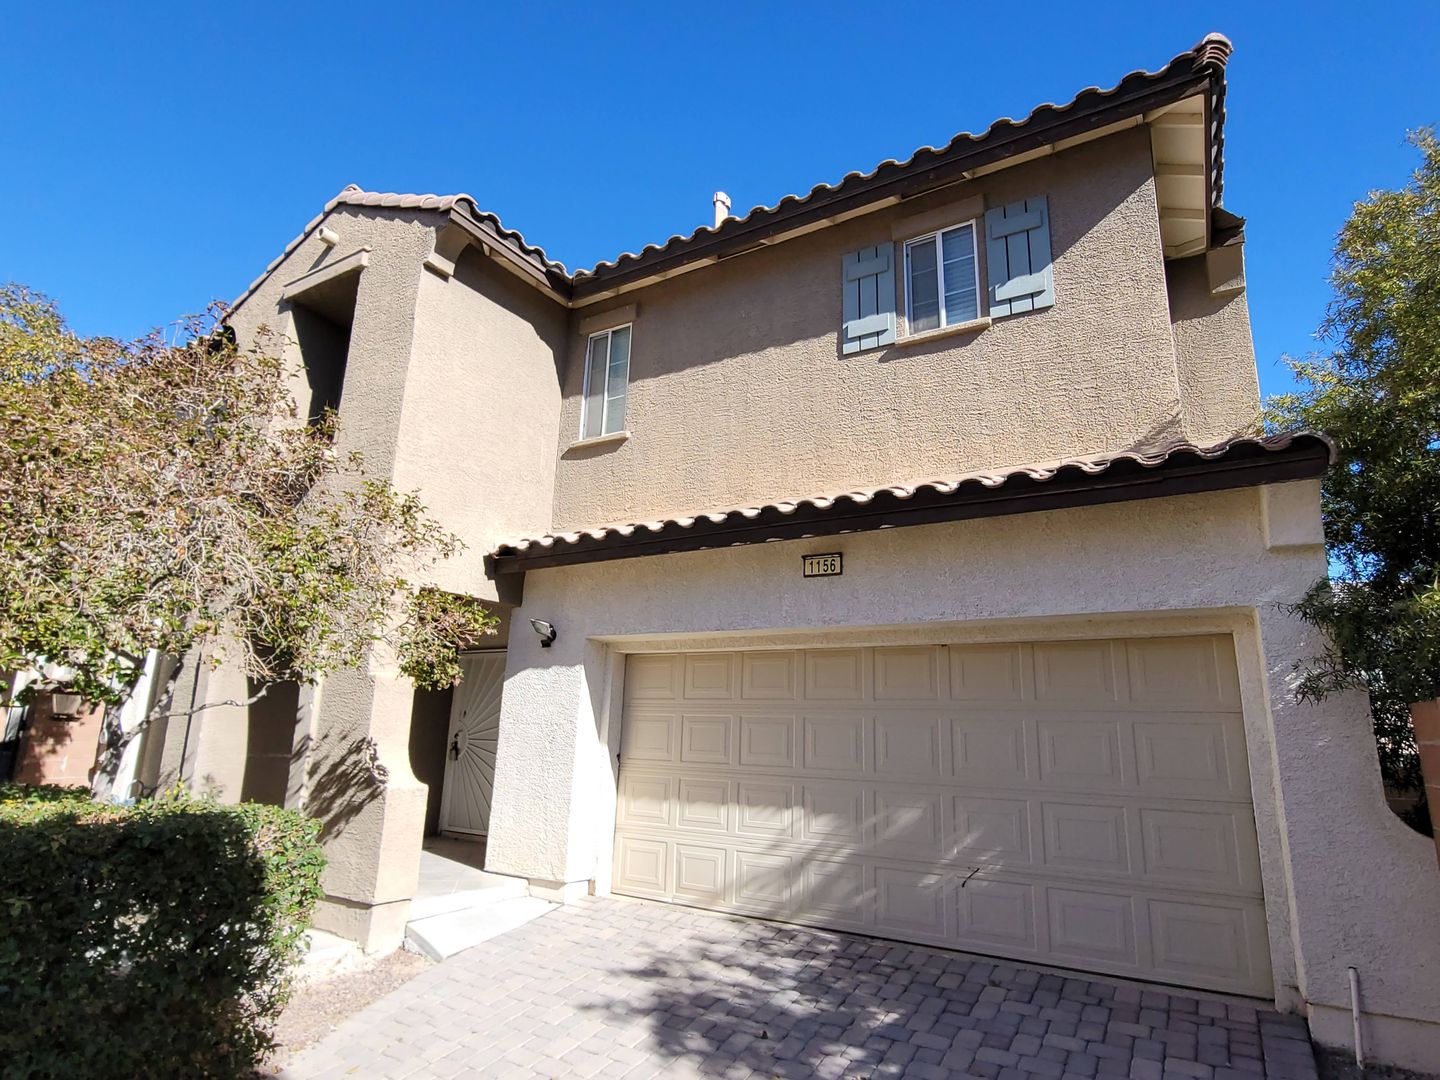 Immaculate 3 Bedroom Home in a Gated Community!